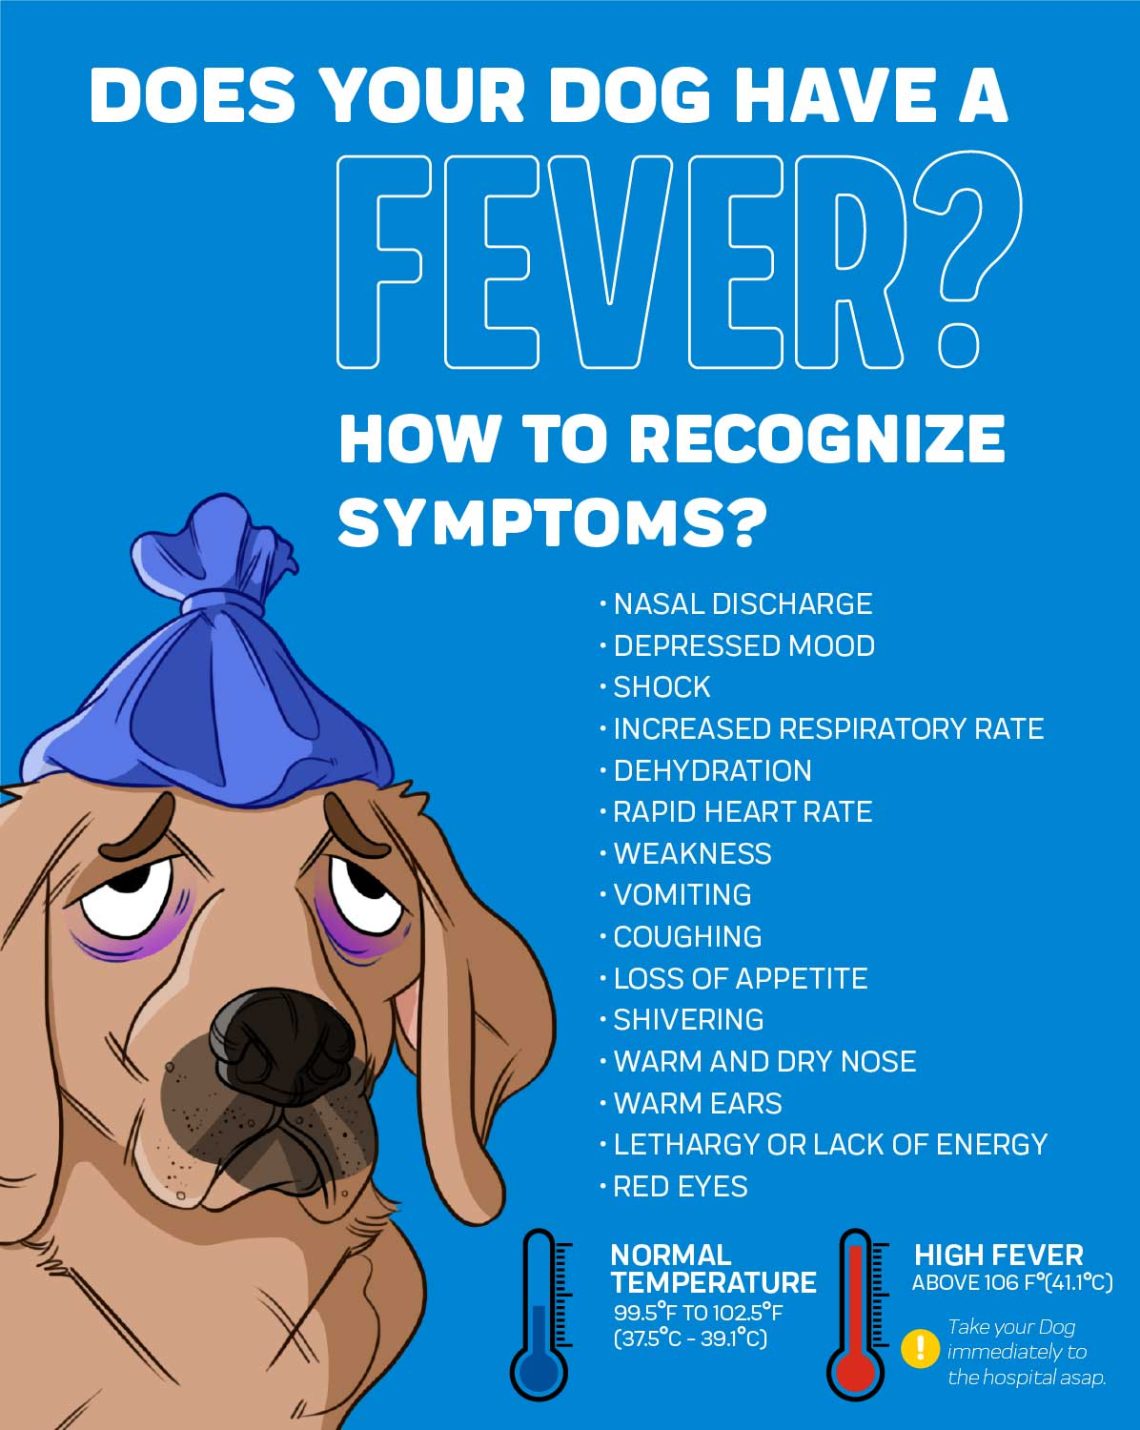 How to help a dog in a fever